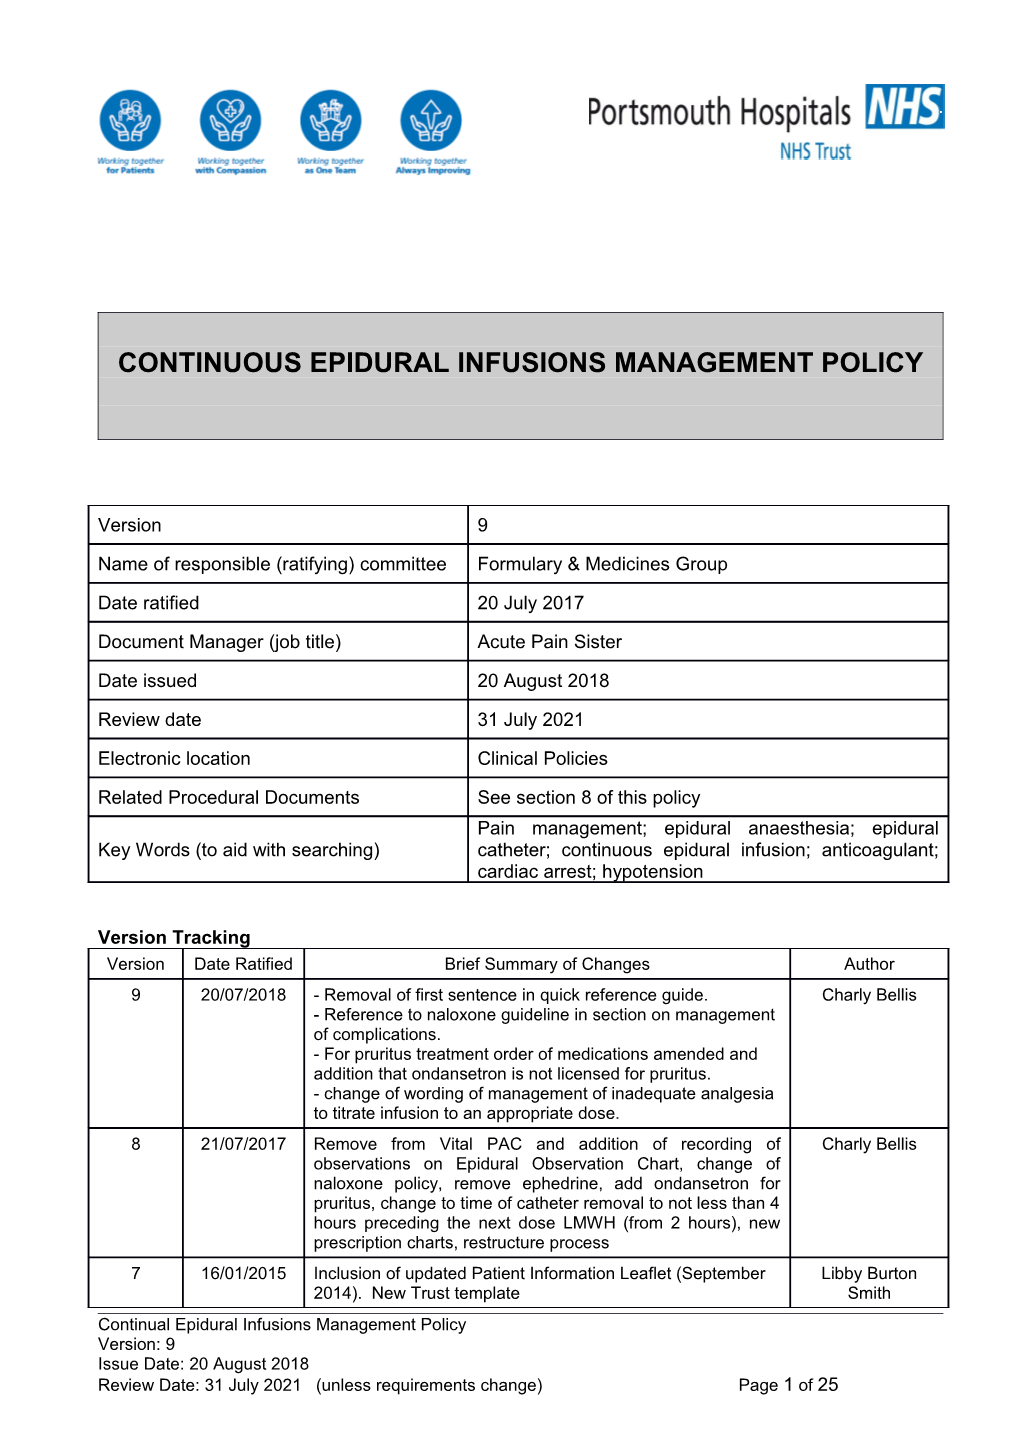 Continuous Epidural Infusions Management Policy